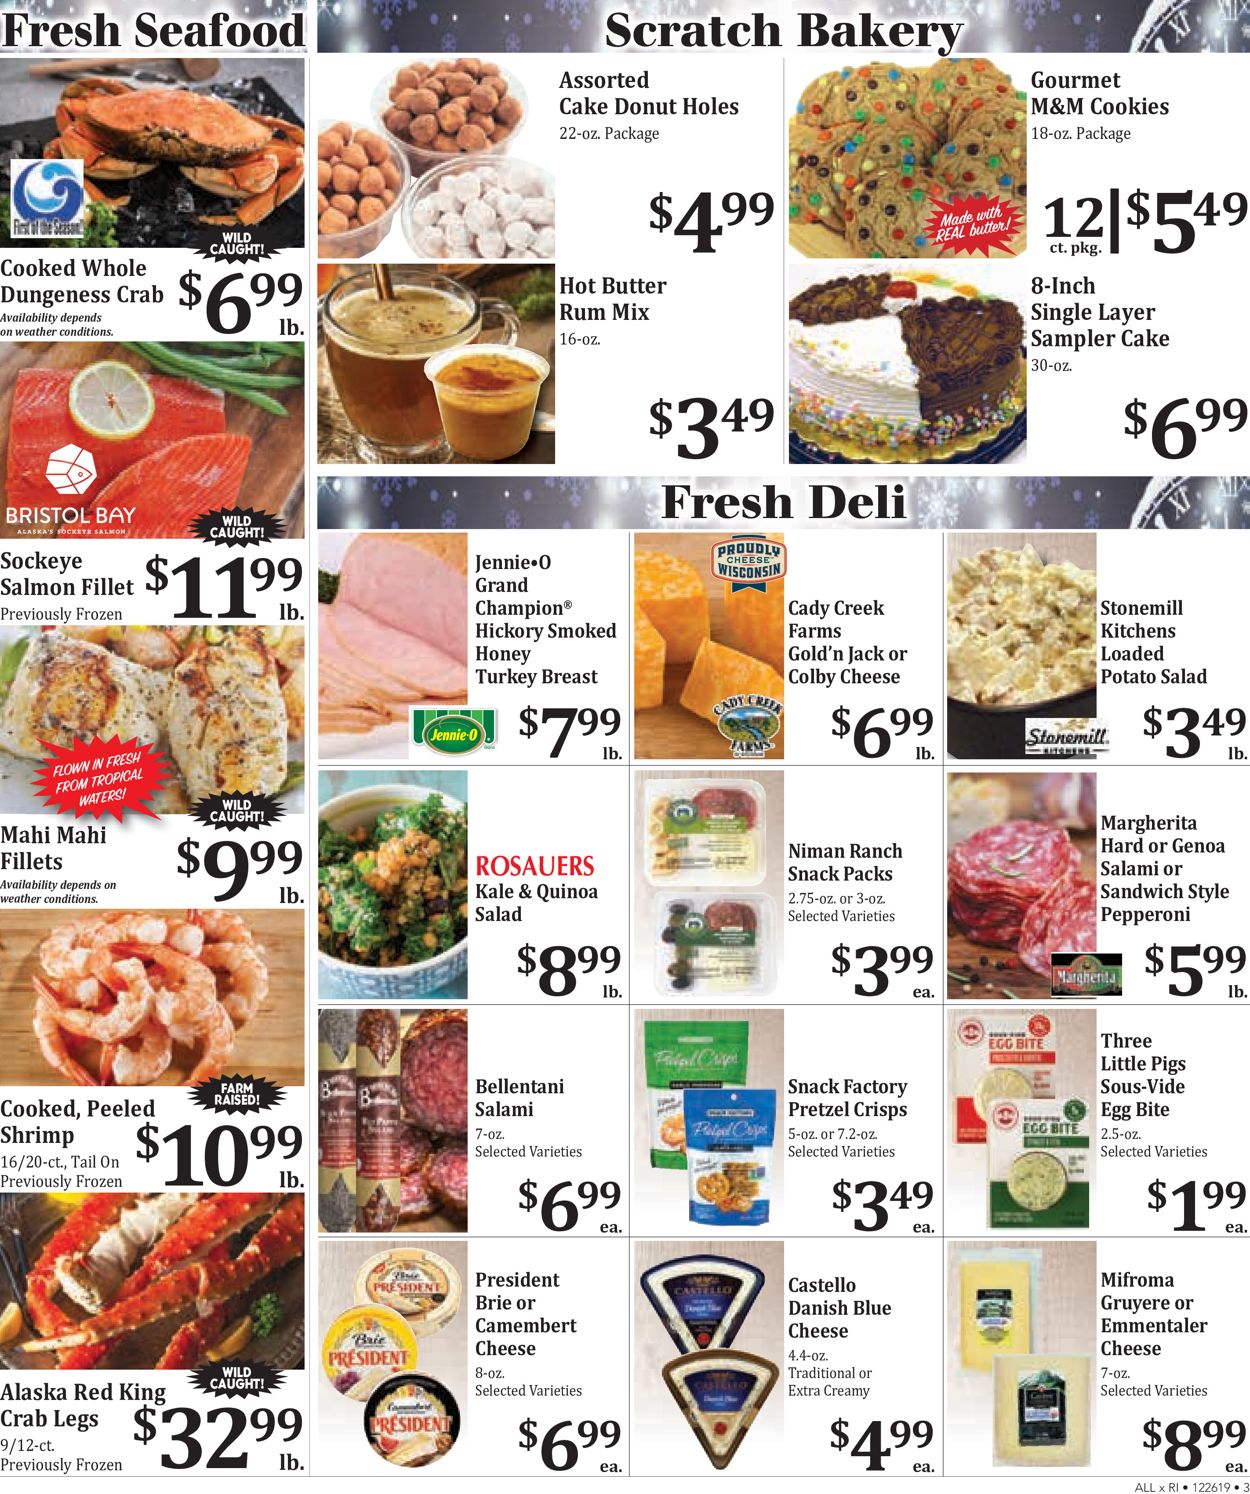 Catalogue Rosauers - New Year's Ad 2019 from 12/26/2019